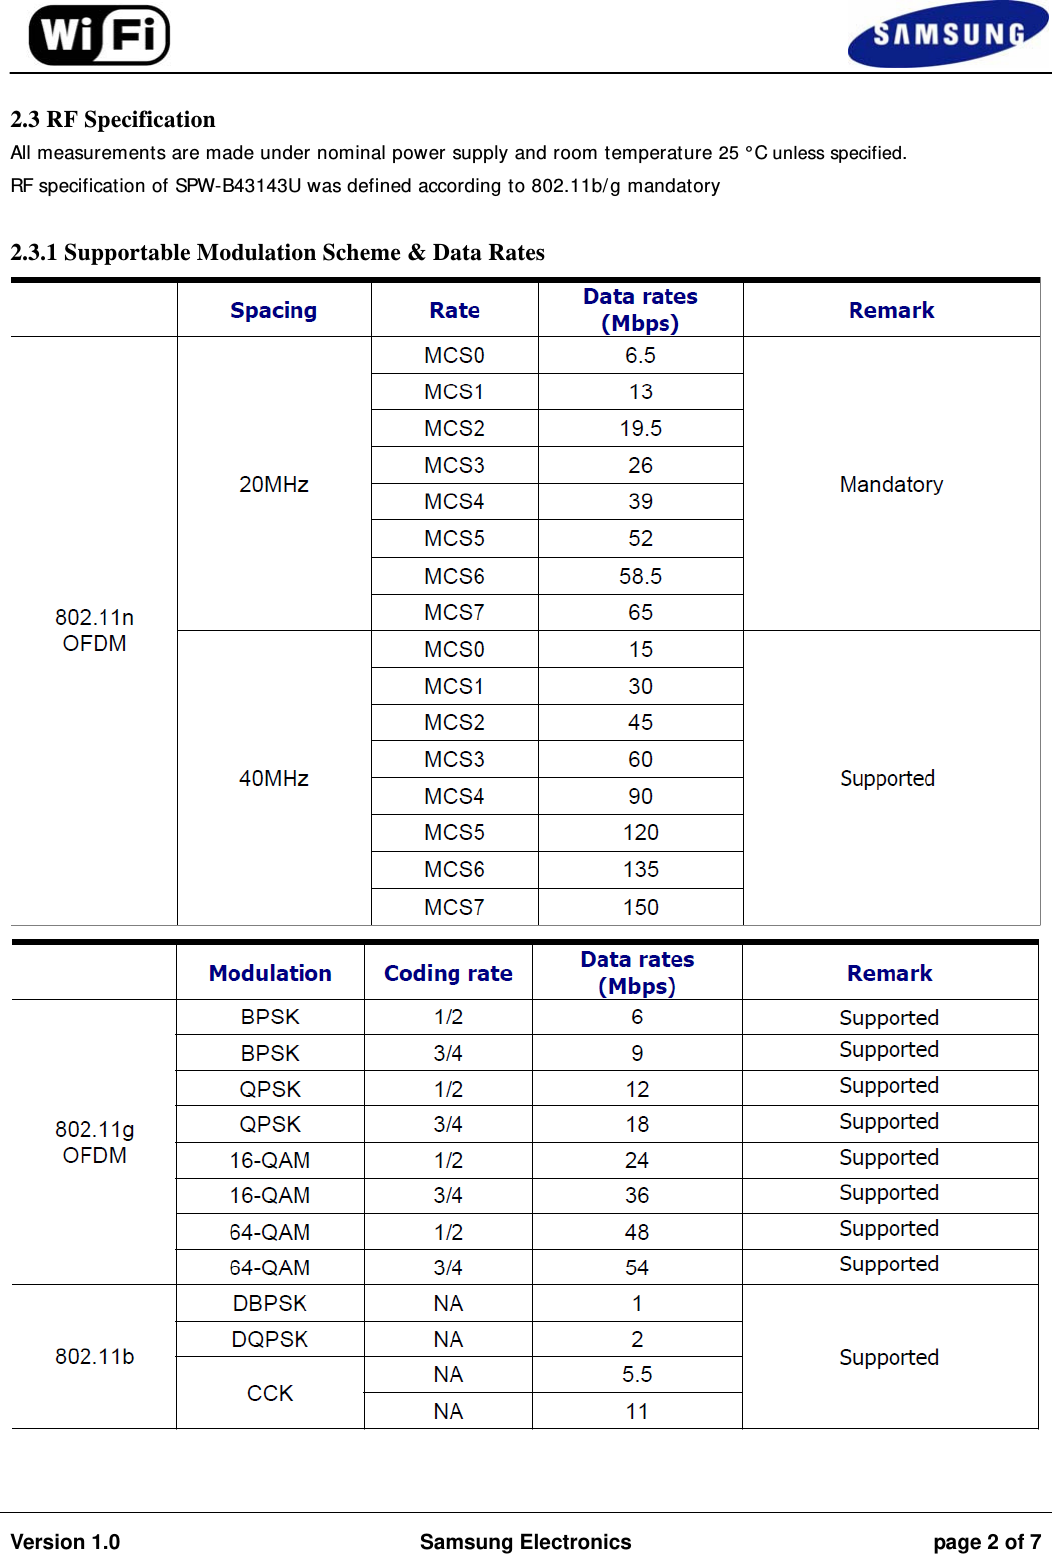                                                                                                                                         Version 1.0  Samsung Electronics  page 2 of 7    2.3 RF Specification All measurements are made under nominal power supply and room temperature 25 °C unless specified. RF specification of SPW-B43143U was defined according to 802.11b/g mandatory  2.3.1 Supportable Modulation Scheme &amp; Data Rates     